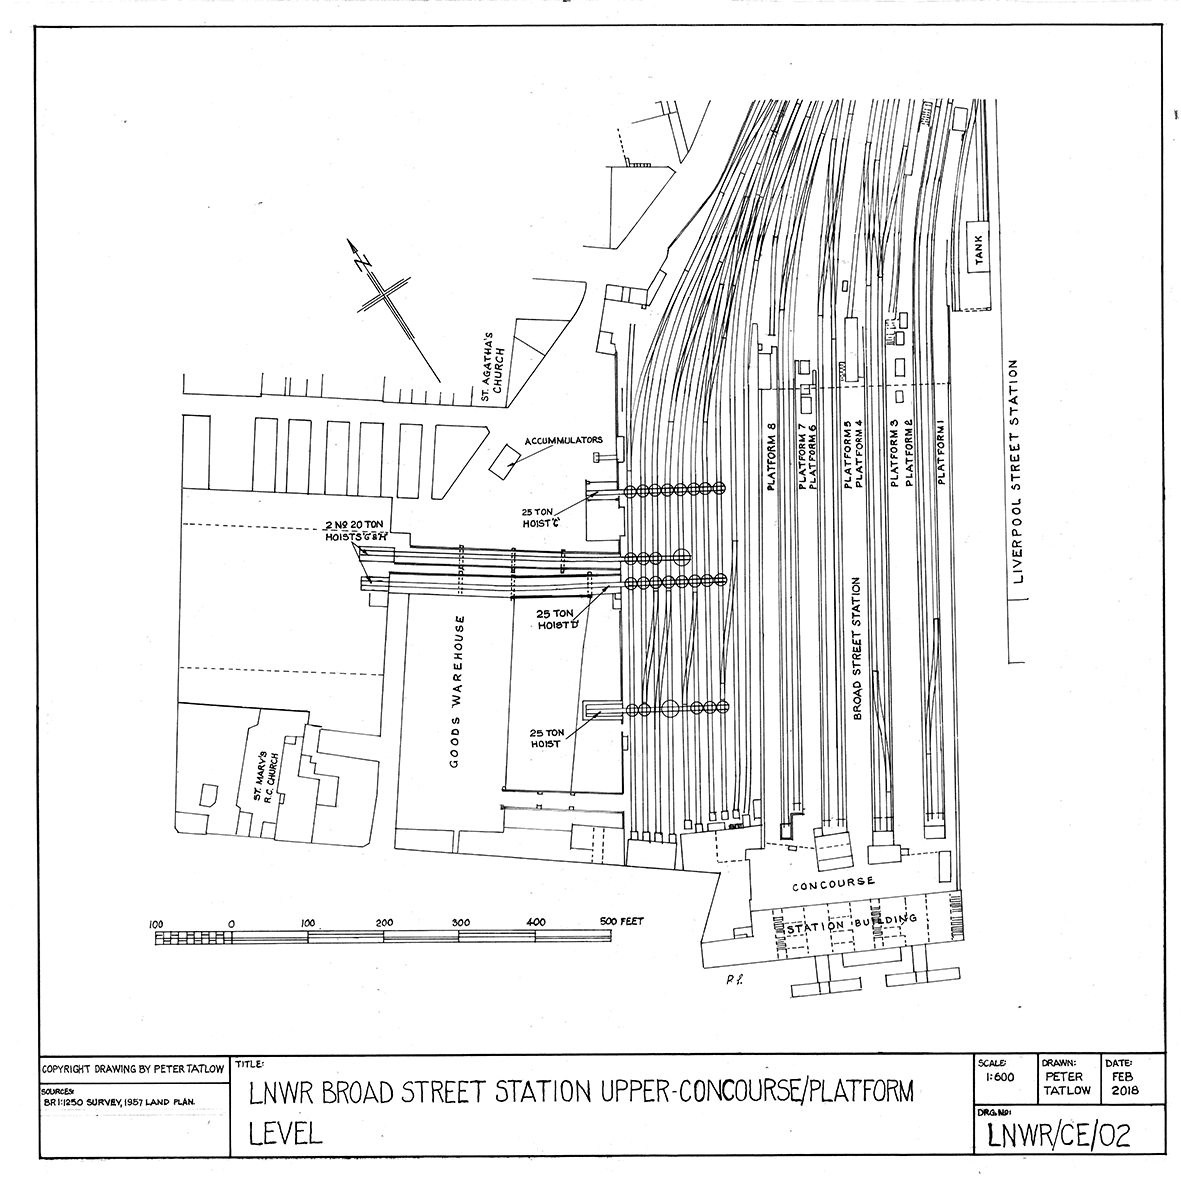 A plan of Broad Street station upper level at concourse level